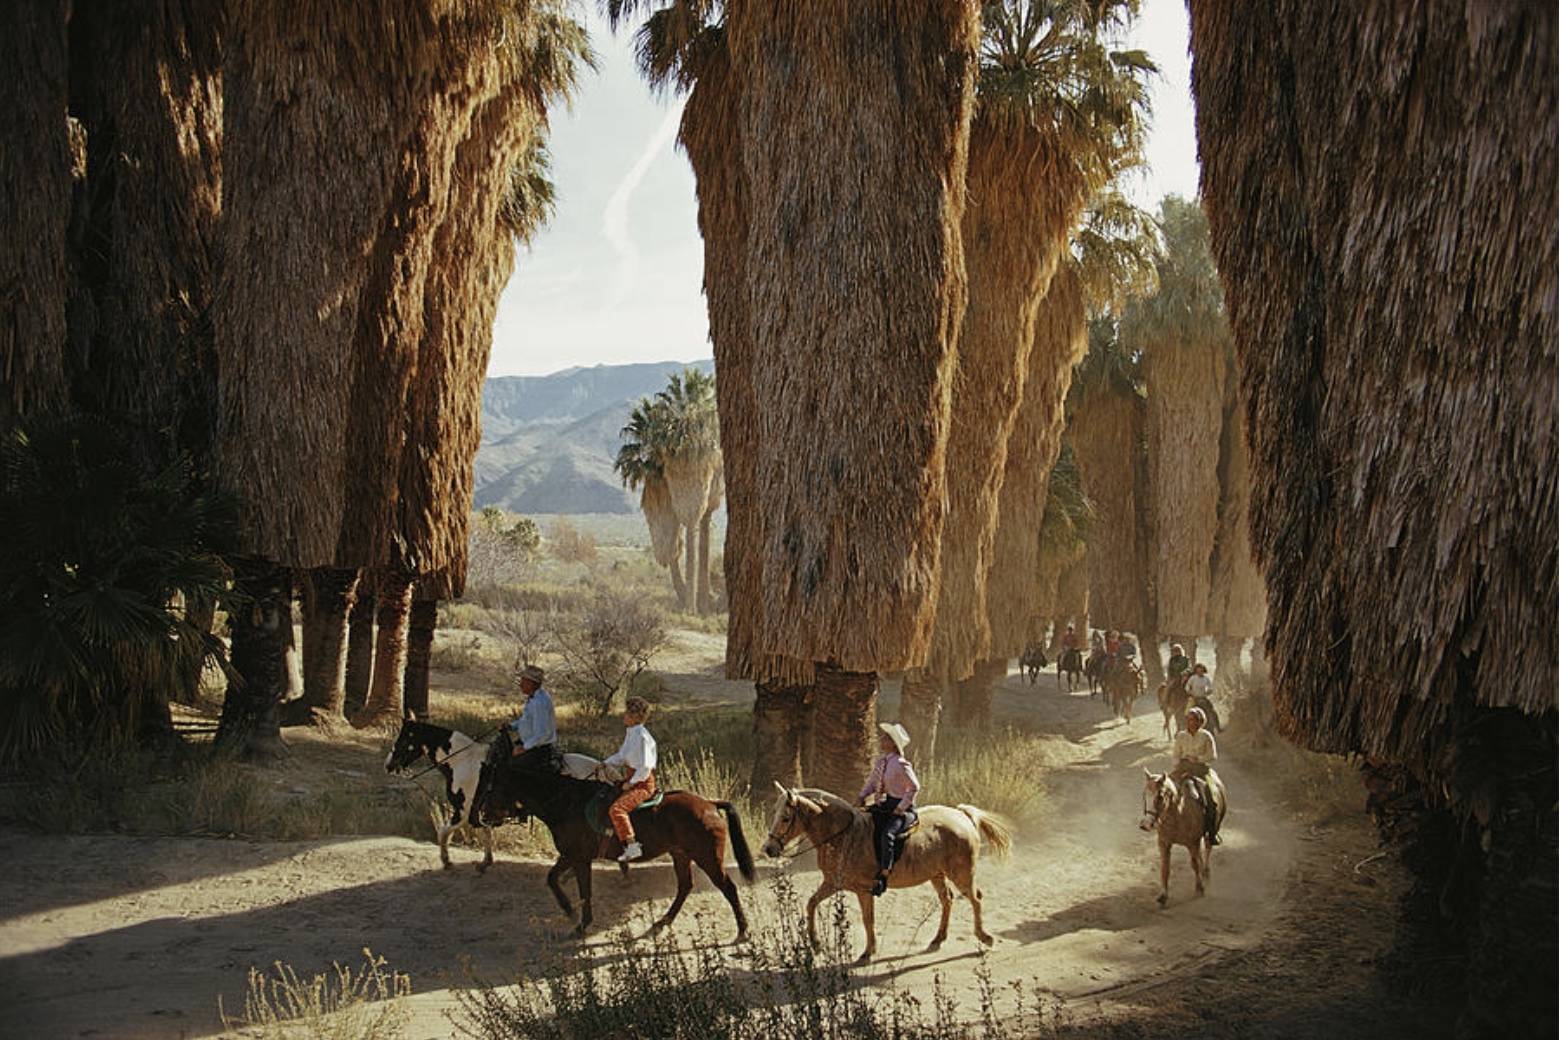 Early Riders by Slim Aarons - A horse riding scene captured by Slim Aarons with tall brown palms in a desert landscape